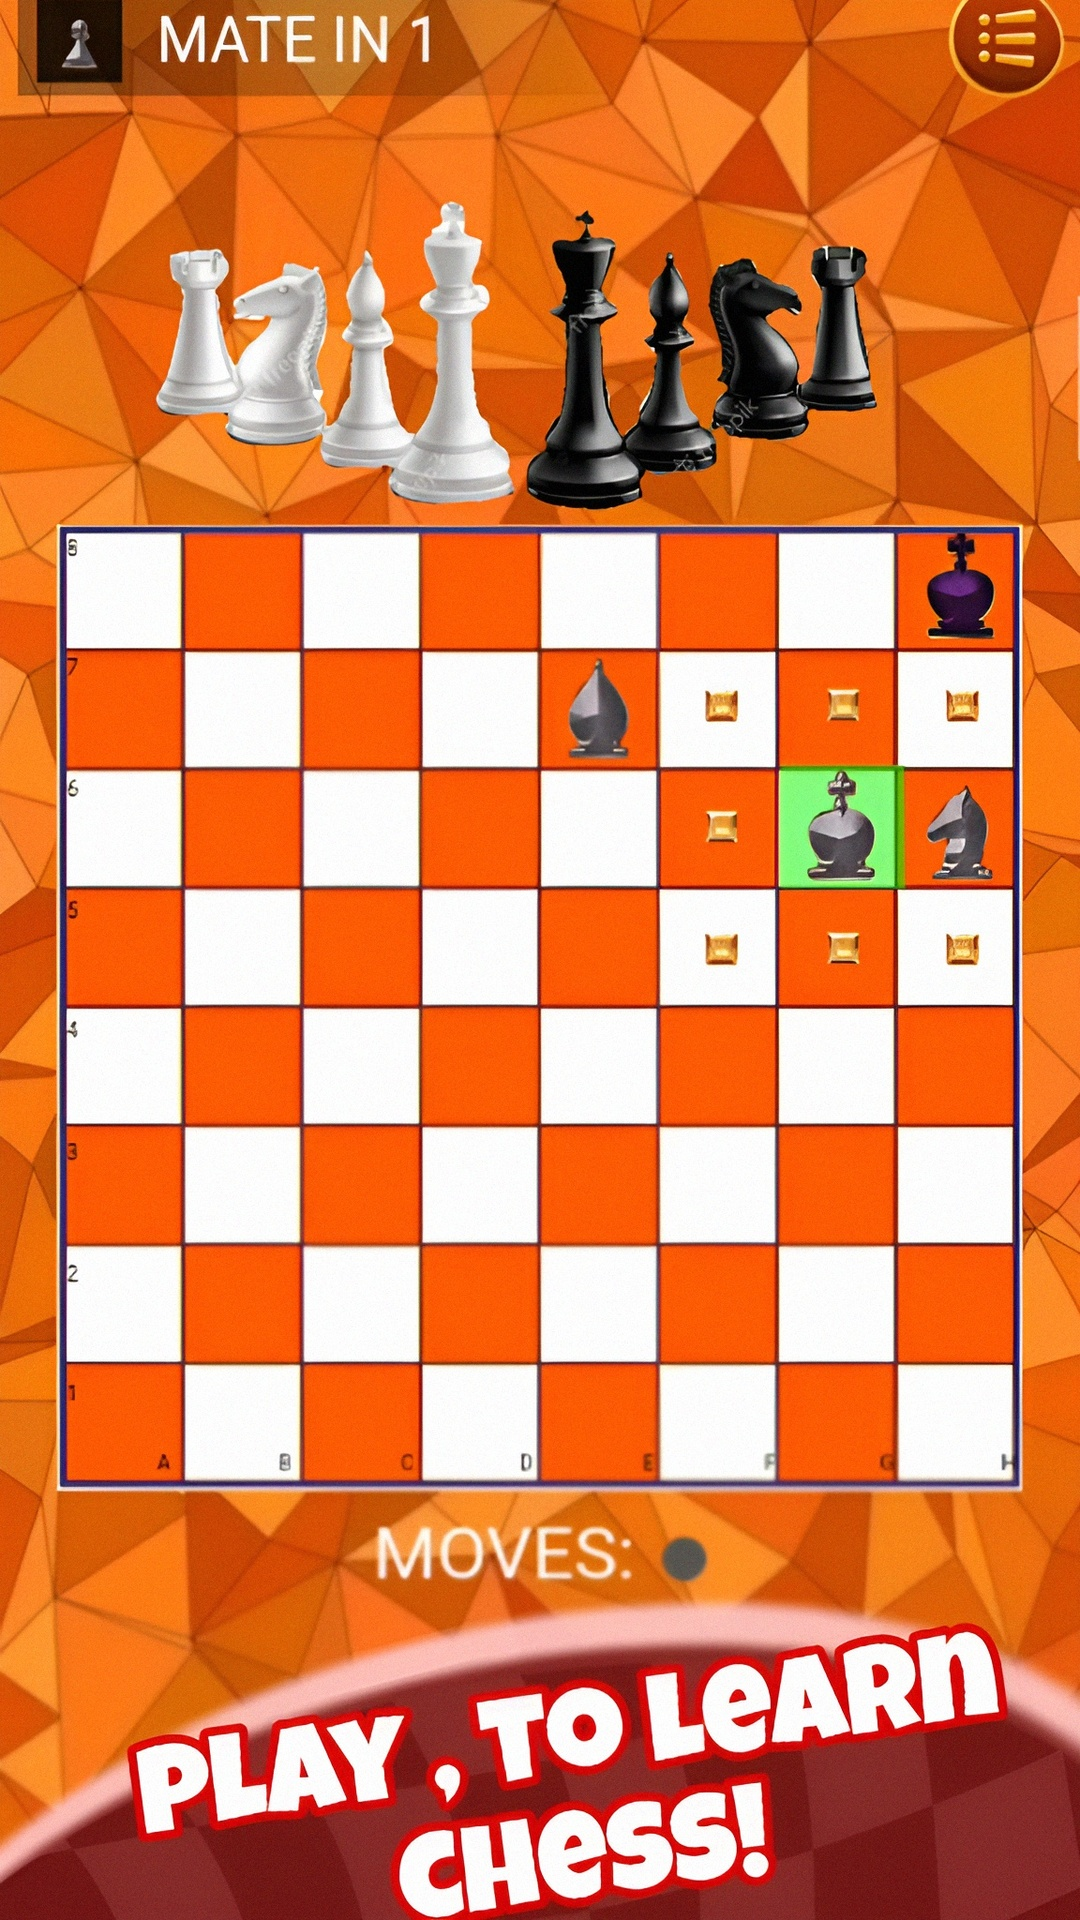 Mate in 1 Move: Chess Puzzleのキャプチャ